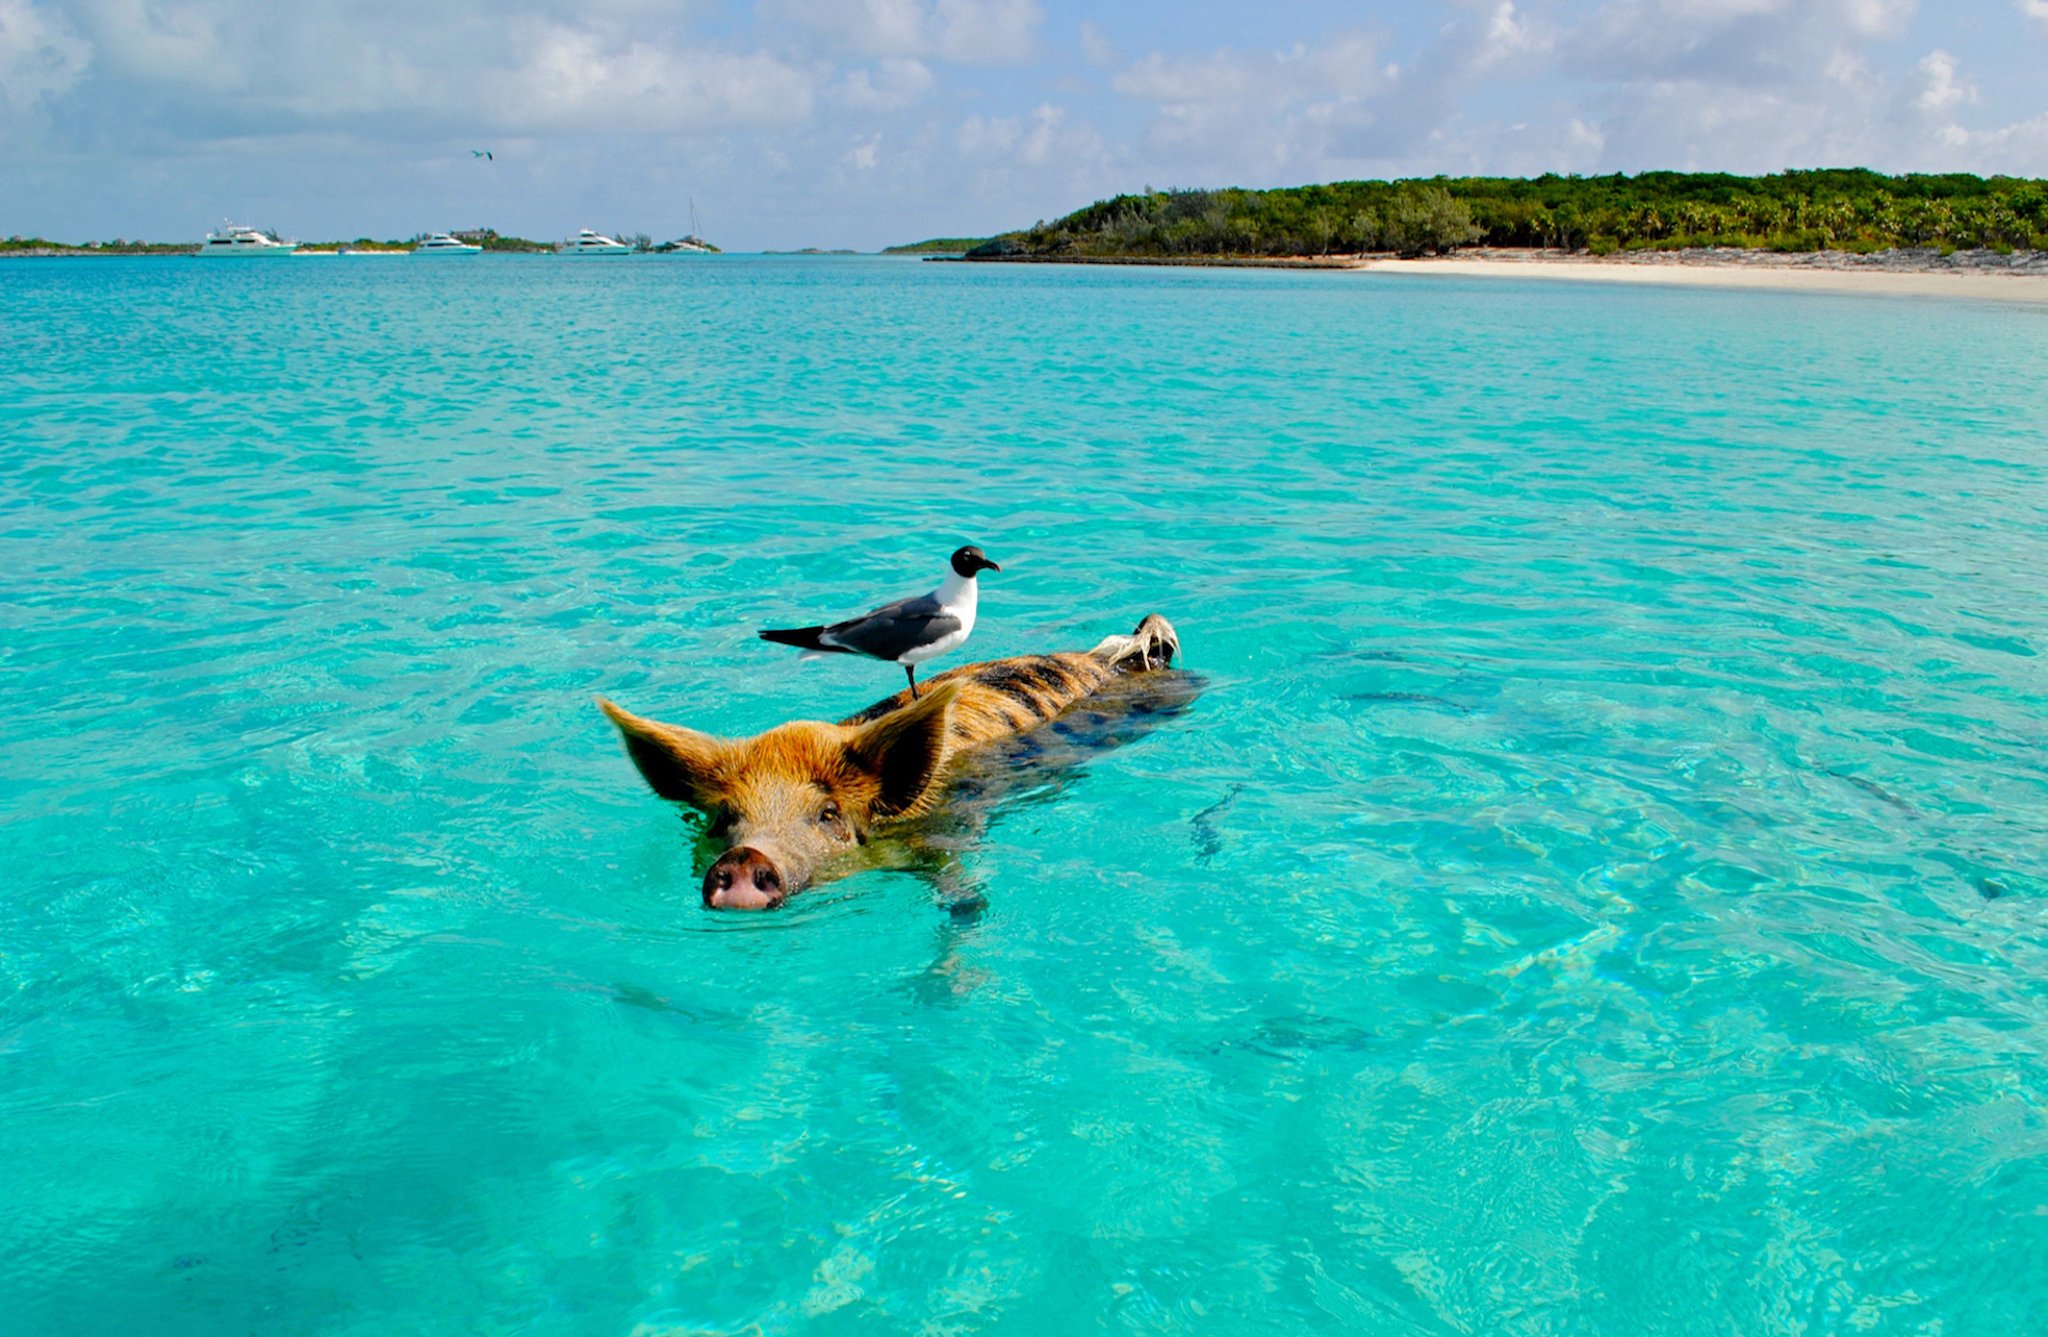 The island is populated by a colony of wild pigs who enjoy an easy life